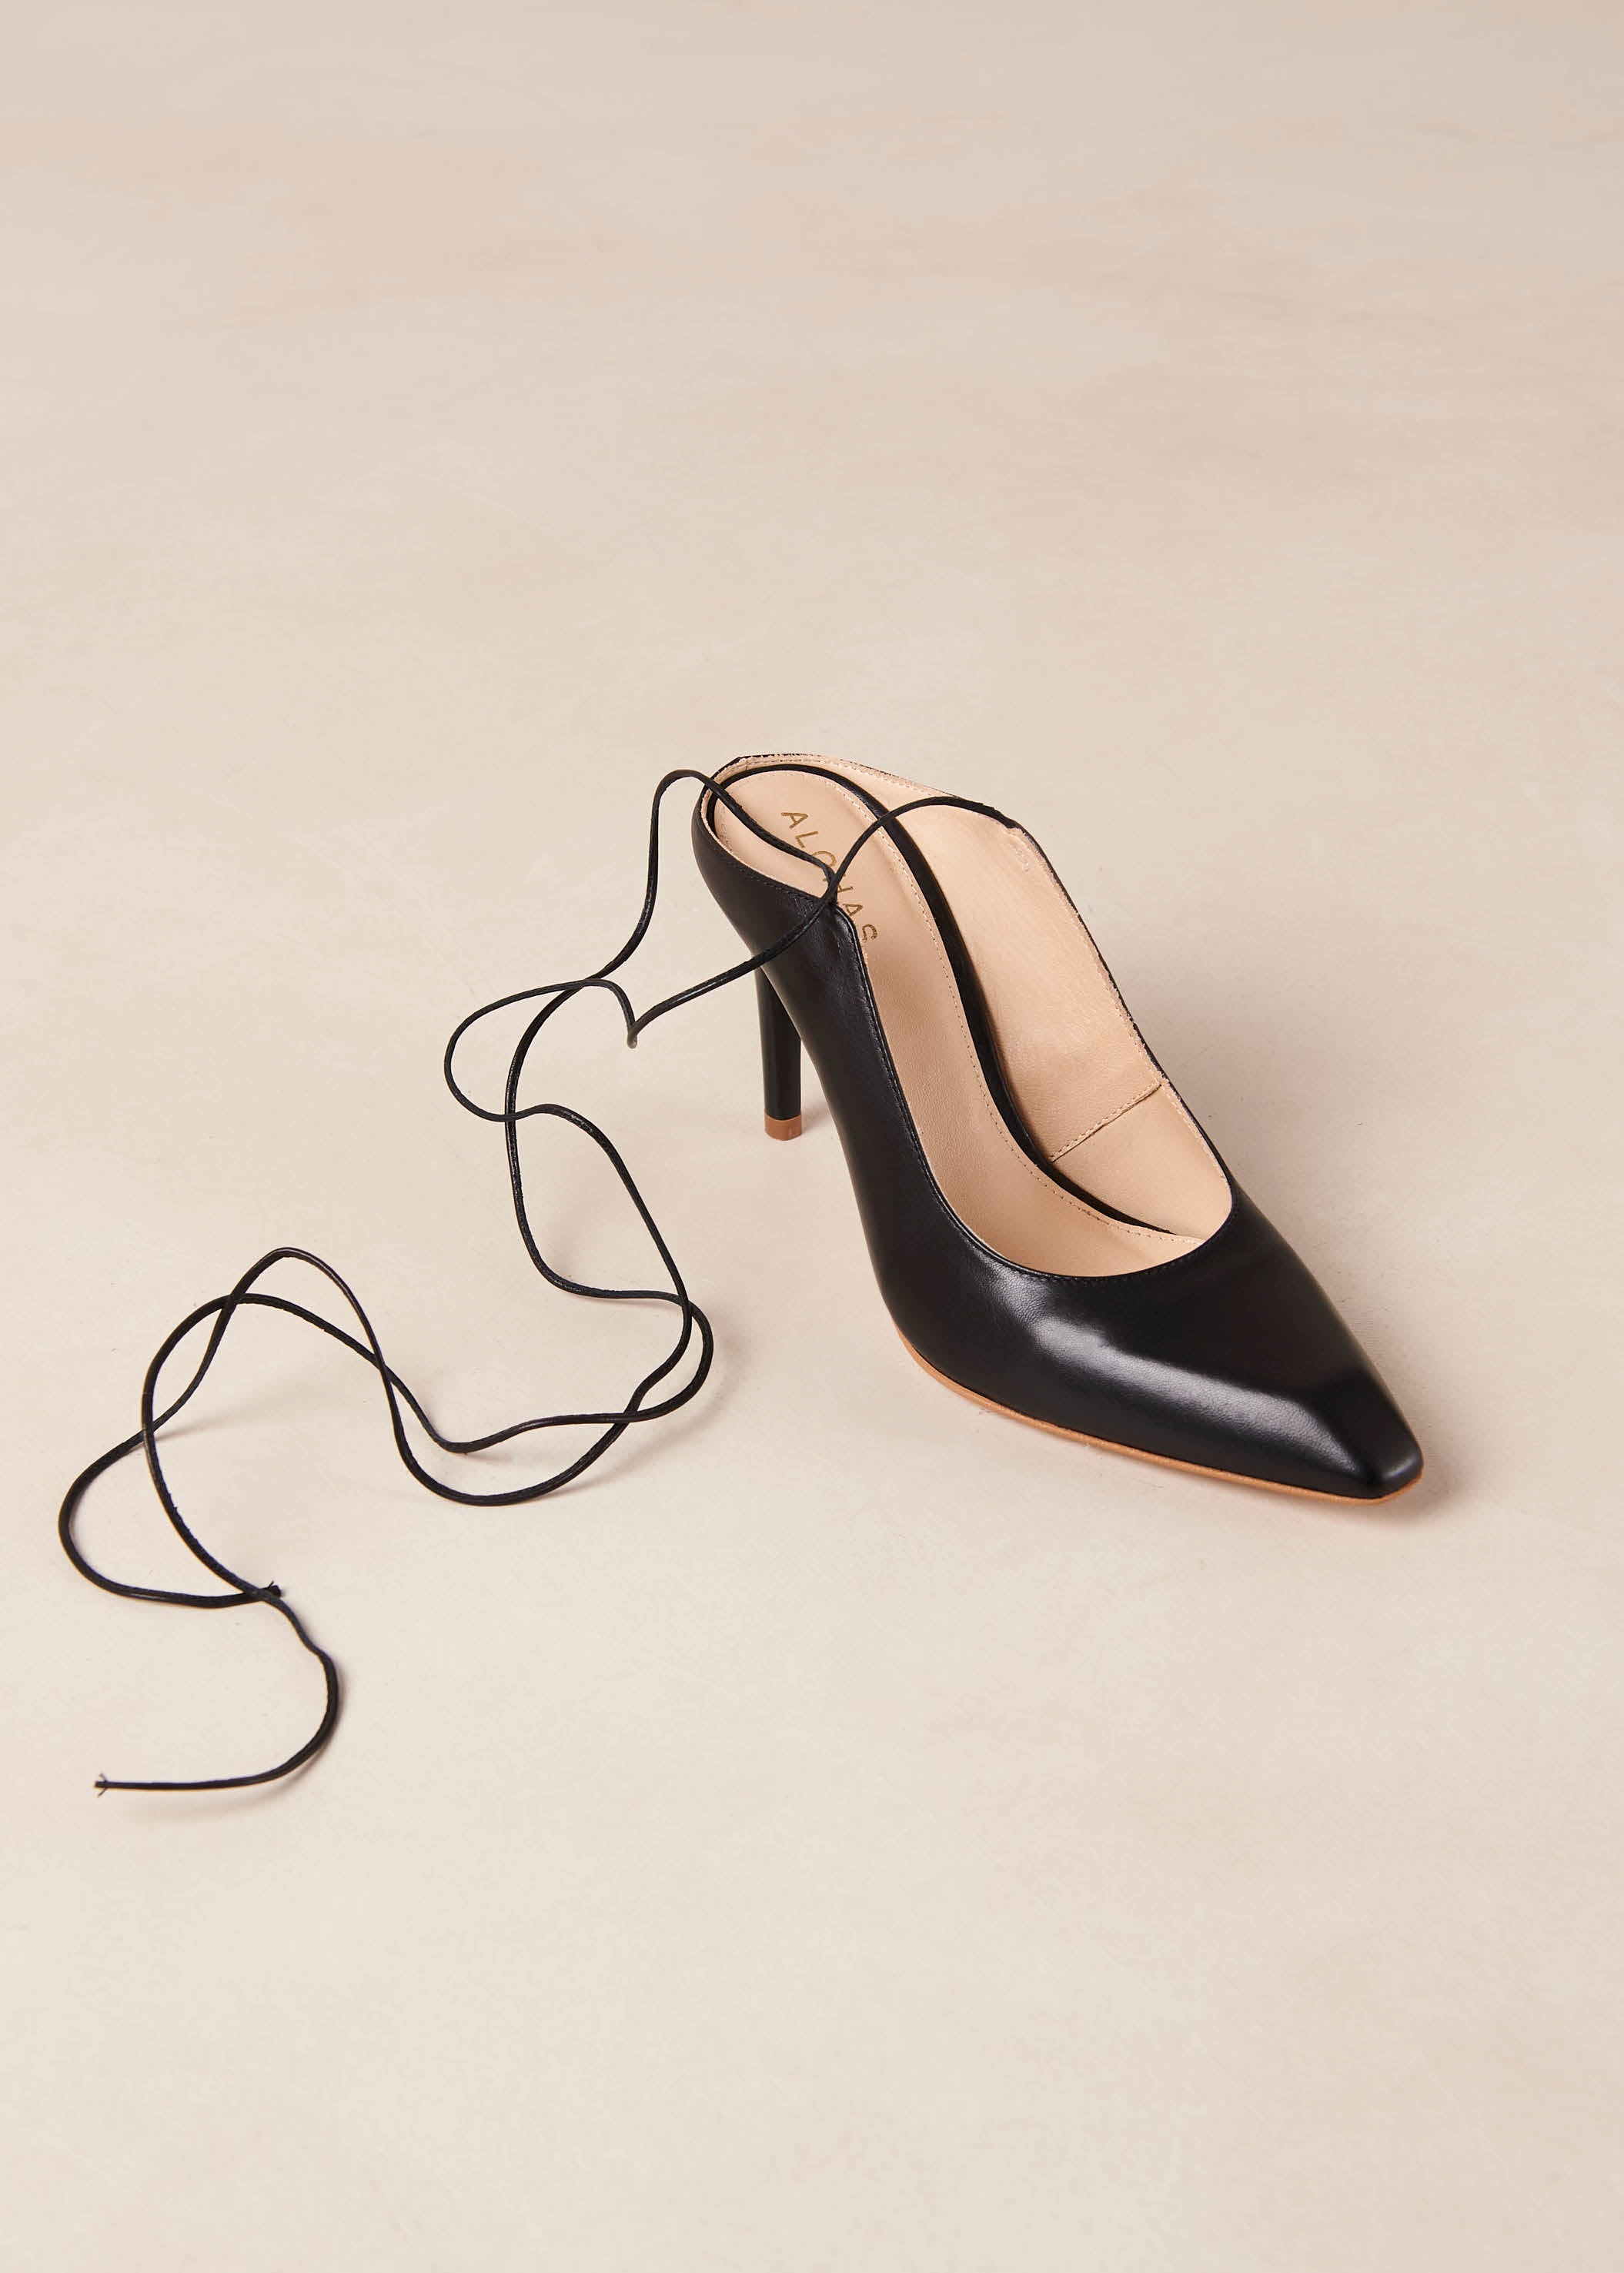 Avery Black Leather Pumps